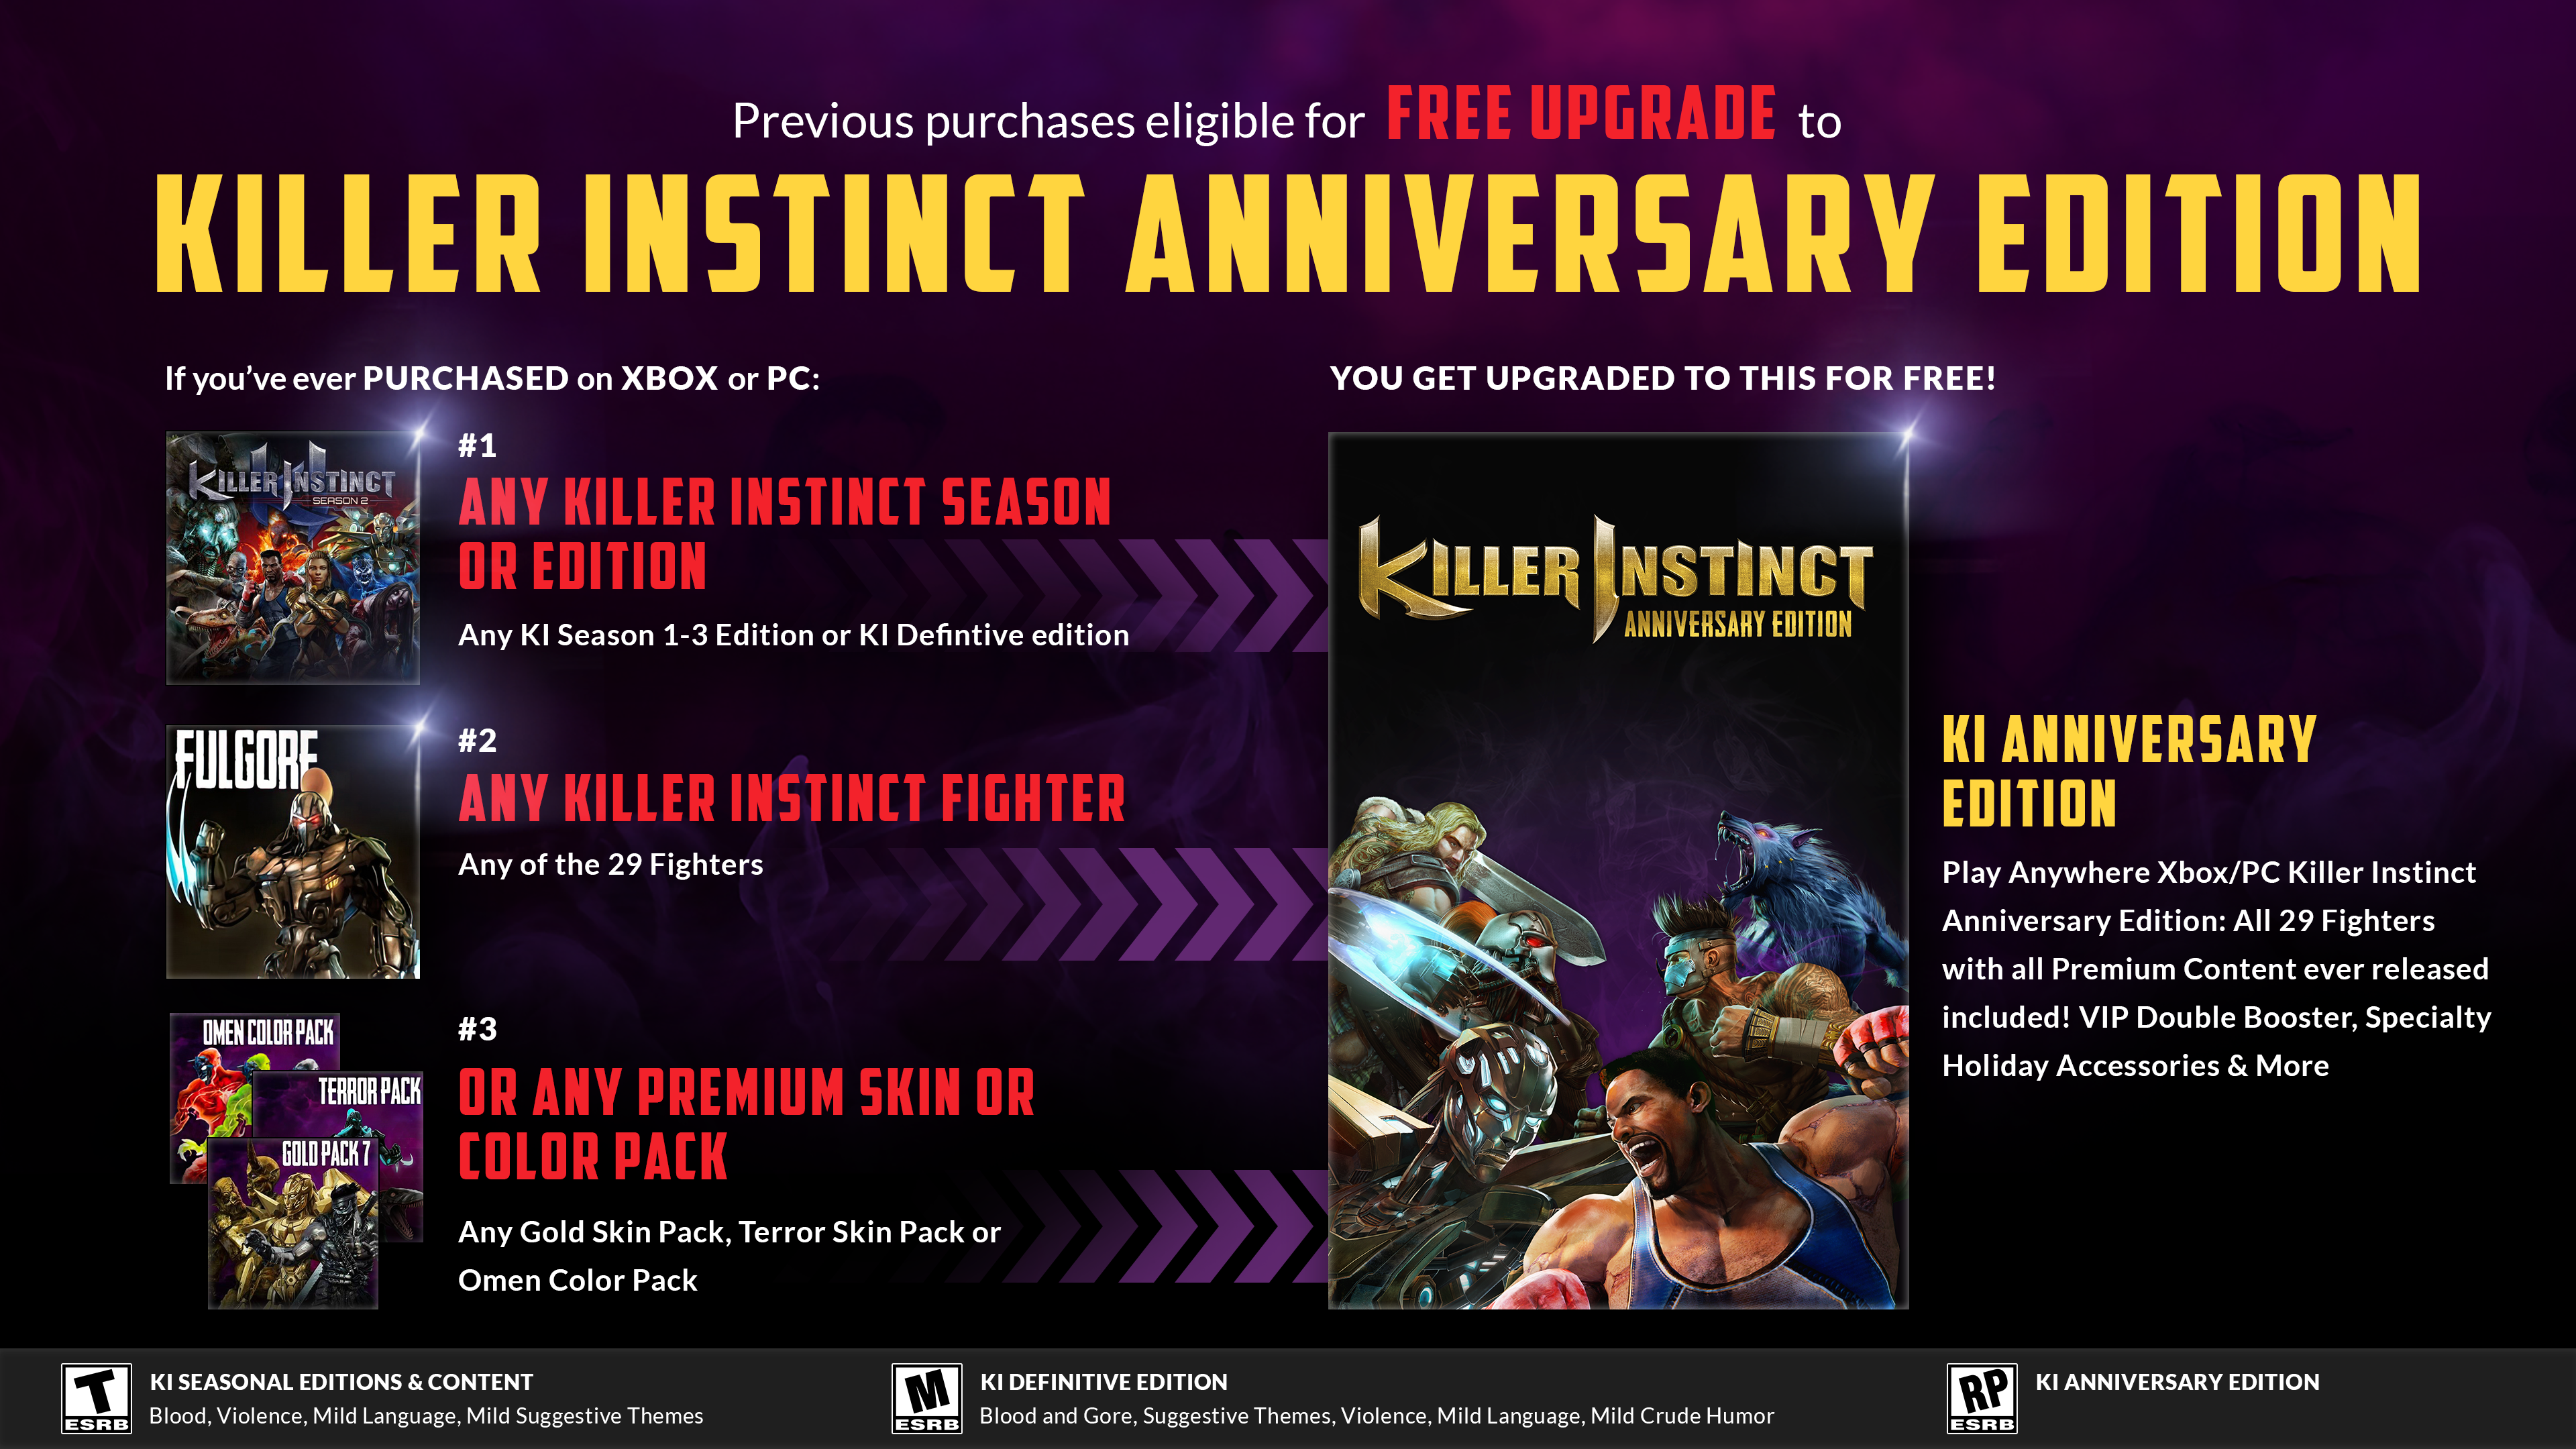 Previous purchases eligible for FREE UPGRADE to Killer Instinct Anniversary Edition If you've ever purchased on Xbox or PC: #1: Any Killer Instinct Season or Edition, or KI Definitive Edition; #2: Any Killer Instinct Fighter (any of the 29 fighters); #3 Or Any Premium Skin or Color Pack (any Gold Skin Pack, Terror Skin Pack or Omen Color Pack) >>> You get upgraded to this for free: KI Anniversary Edition! Play Anywhere Xbox/PC Killer Instinct Anniversary Edition: All 29 Fighters with all Premium Content ever released included! VIP Double Booster, Specialty Holiday Accessories & More ESRB Rated T for Teen: KI Seasonal Editions & Content: Blood, Violence, Mild Language, Mild Suggestive Themes ESRB Rated M for Mature: KI Definitive Edition: Blood and Gore, Suggestive Themes, Violence, Mild Language, Crude Humor ESRB Rated RP for Rating Pending: KI Anniversary Edition